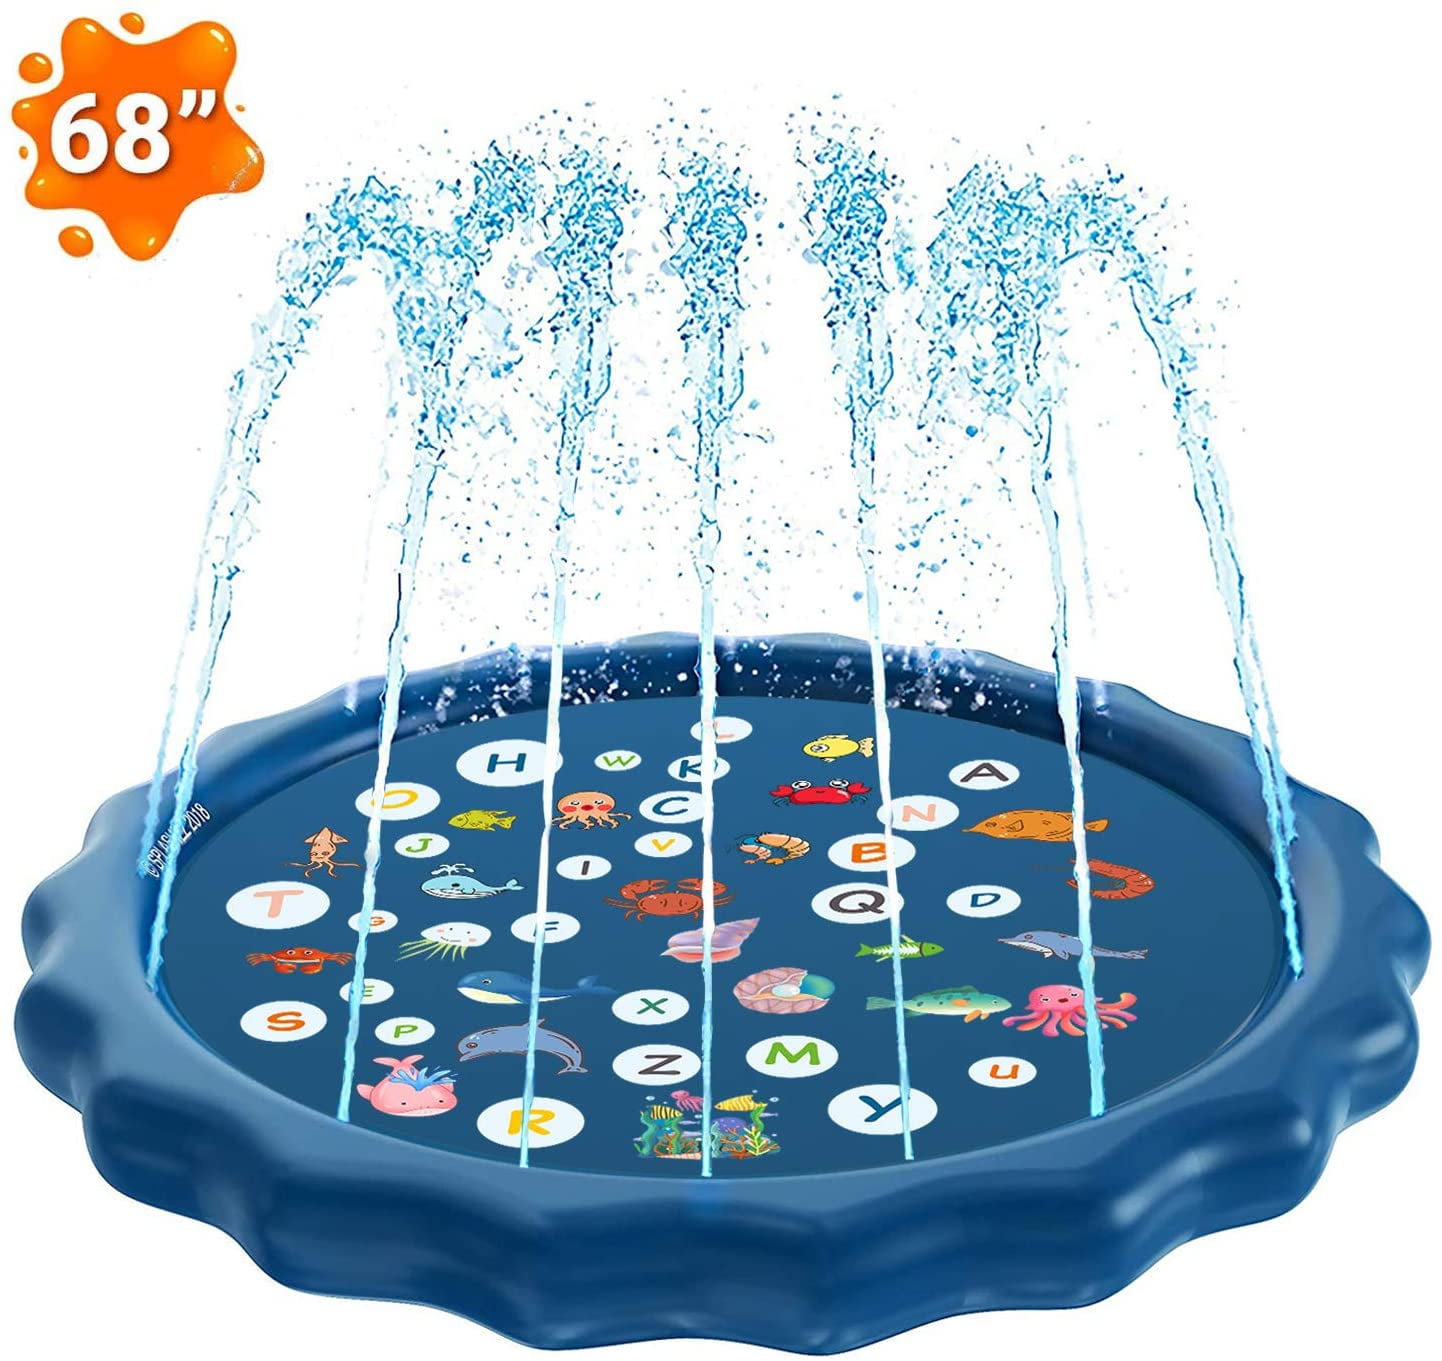 Splash Pad Sprinkler for Kids Water-Filled Play Mat Sprinkler Pool Water Toys with Education Fun for Kids and Family Activities World Map 71in Blue